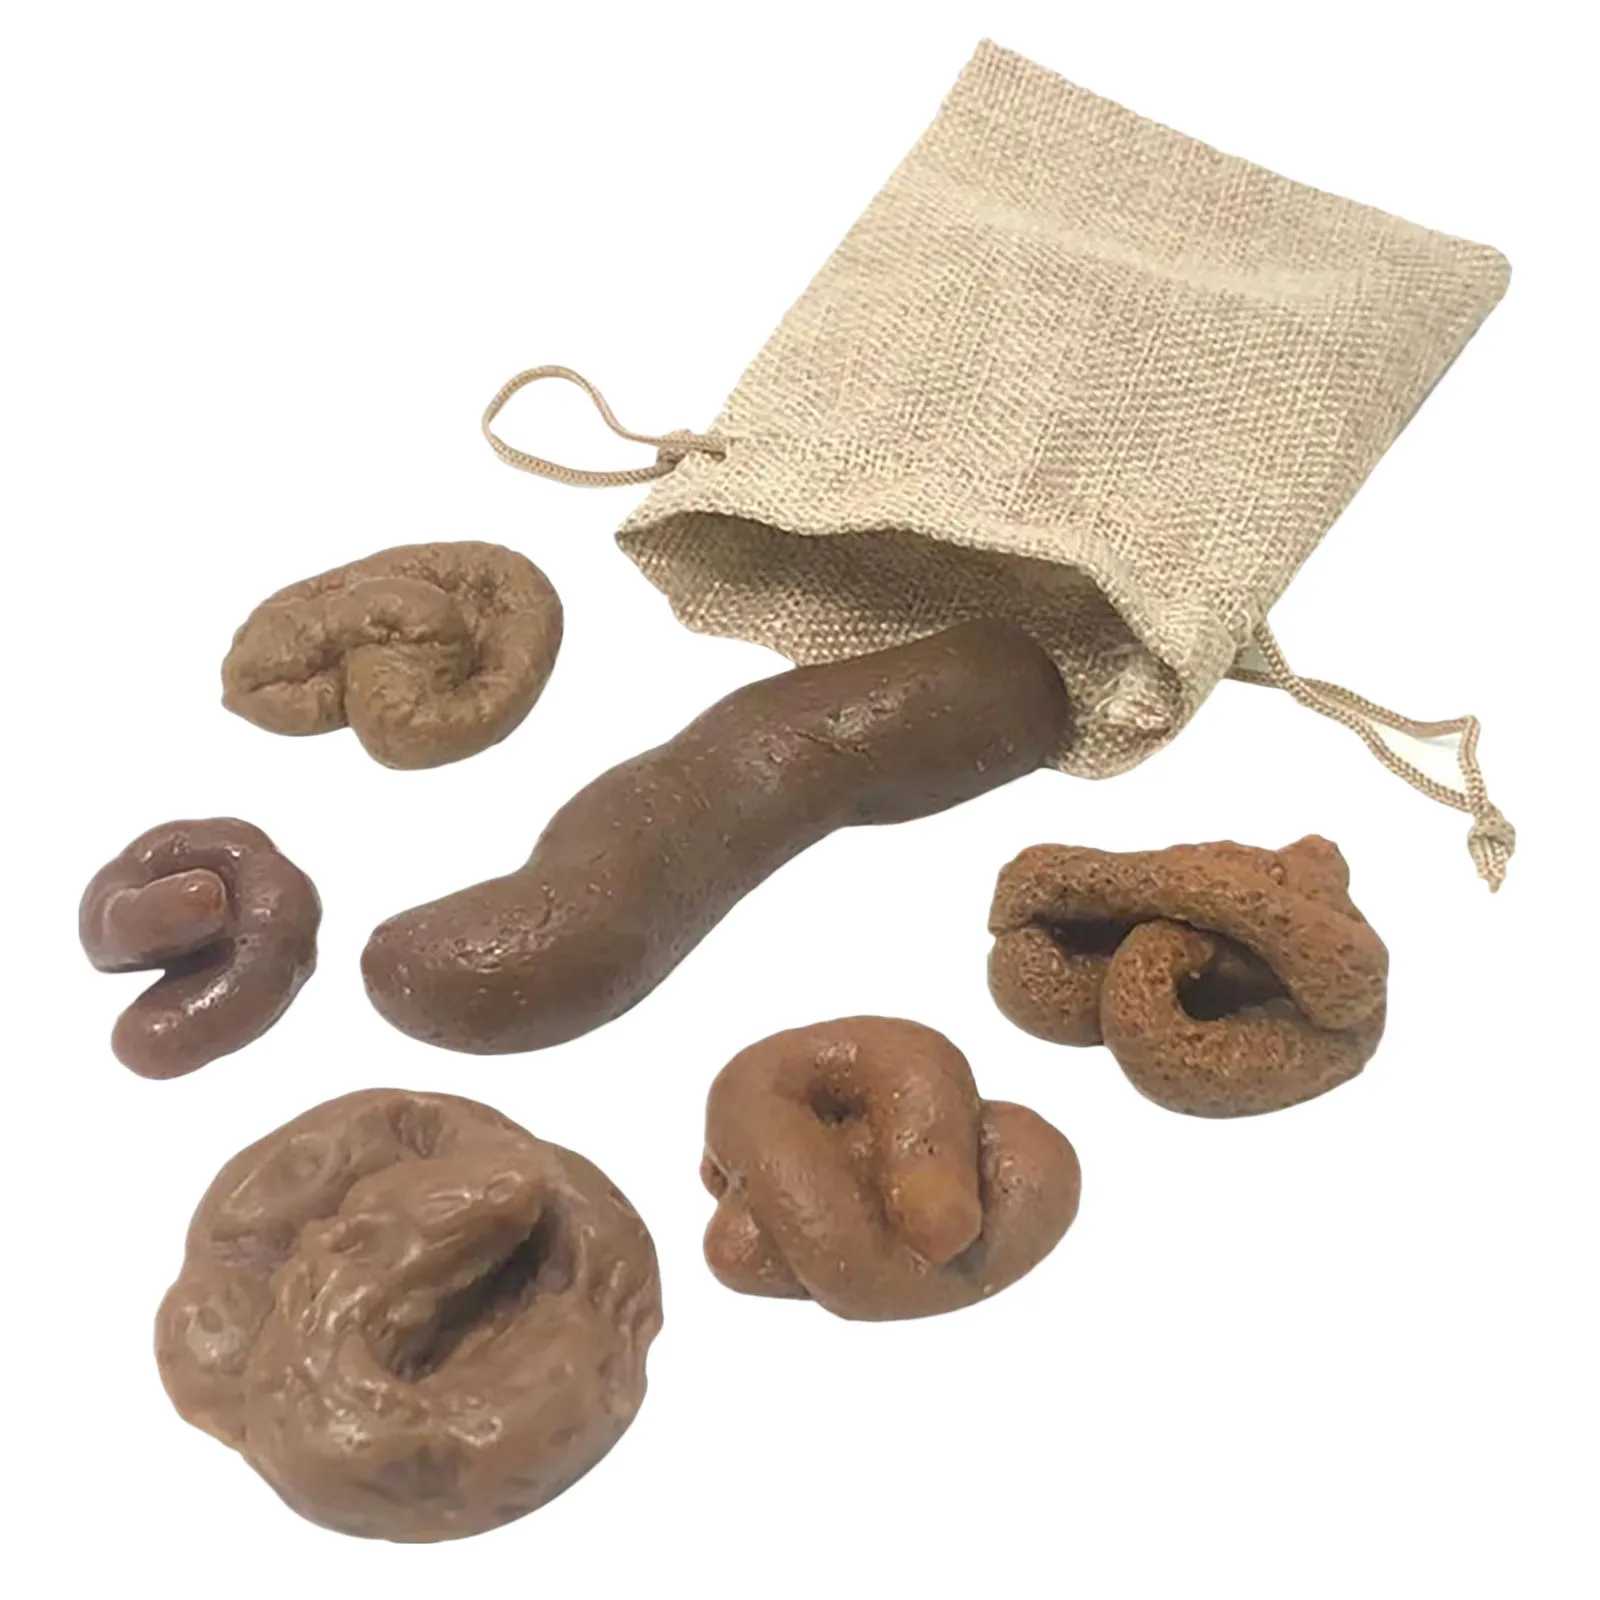 

6Pcs Realistic Shit Gift Funny Toys Fake Poop Piece of Shit Prank Antistress Gadget Squish Toys Joke Tricky Toys Turd Mischief